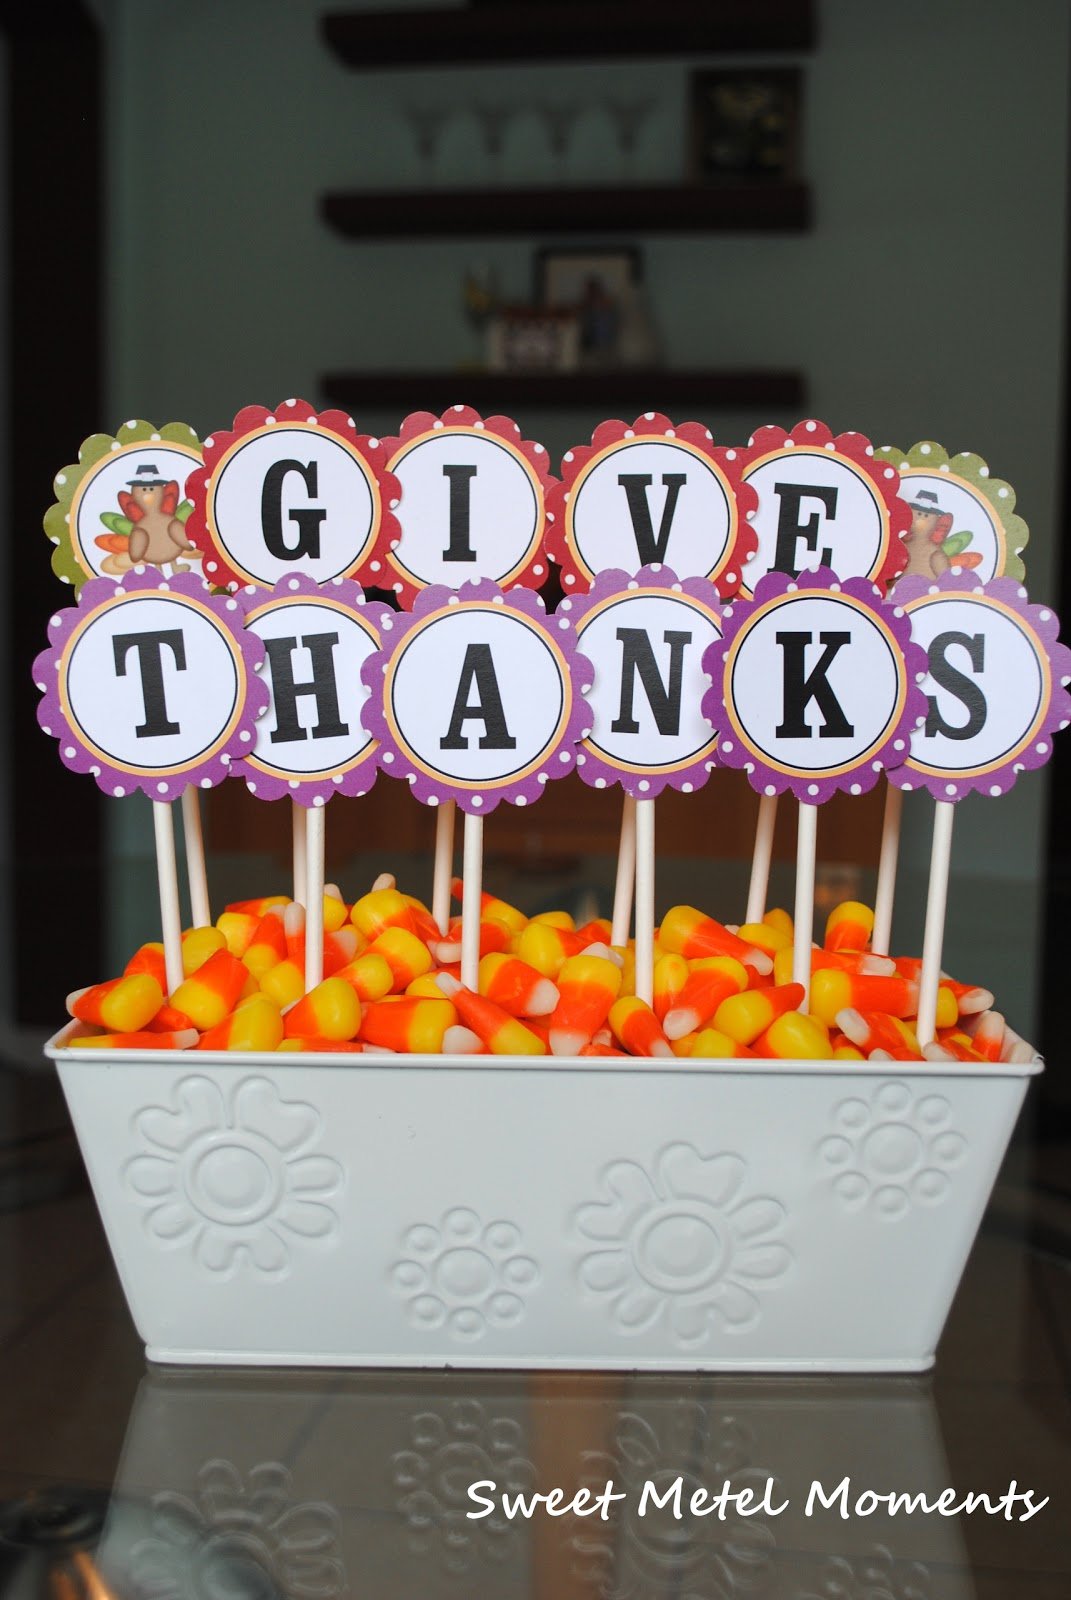 Candy-corn Dish with Printable “Give Thanks” Sign